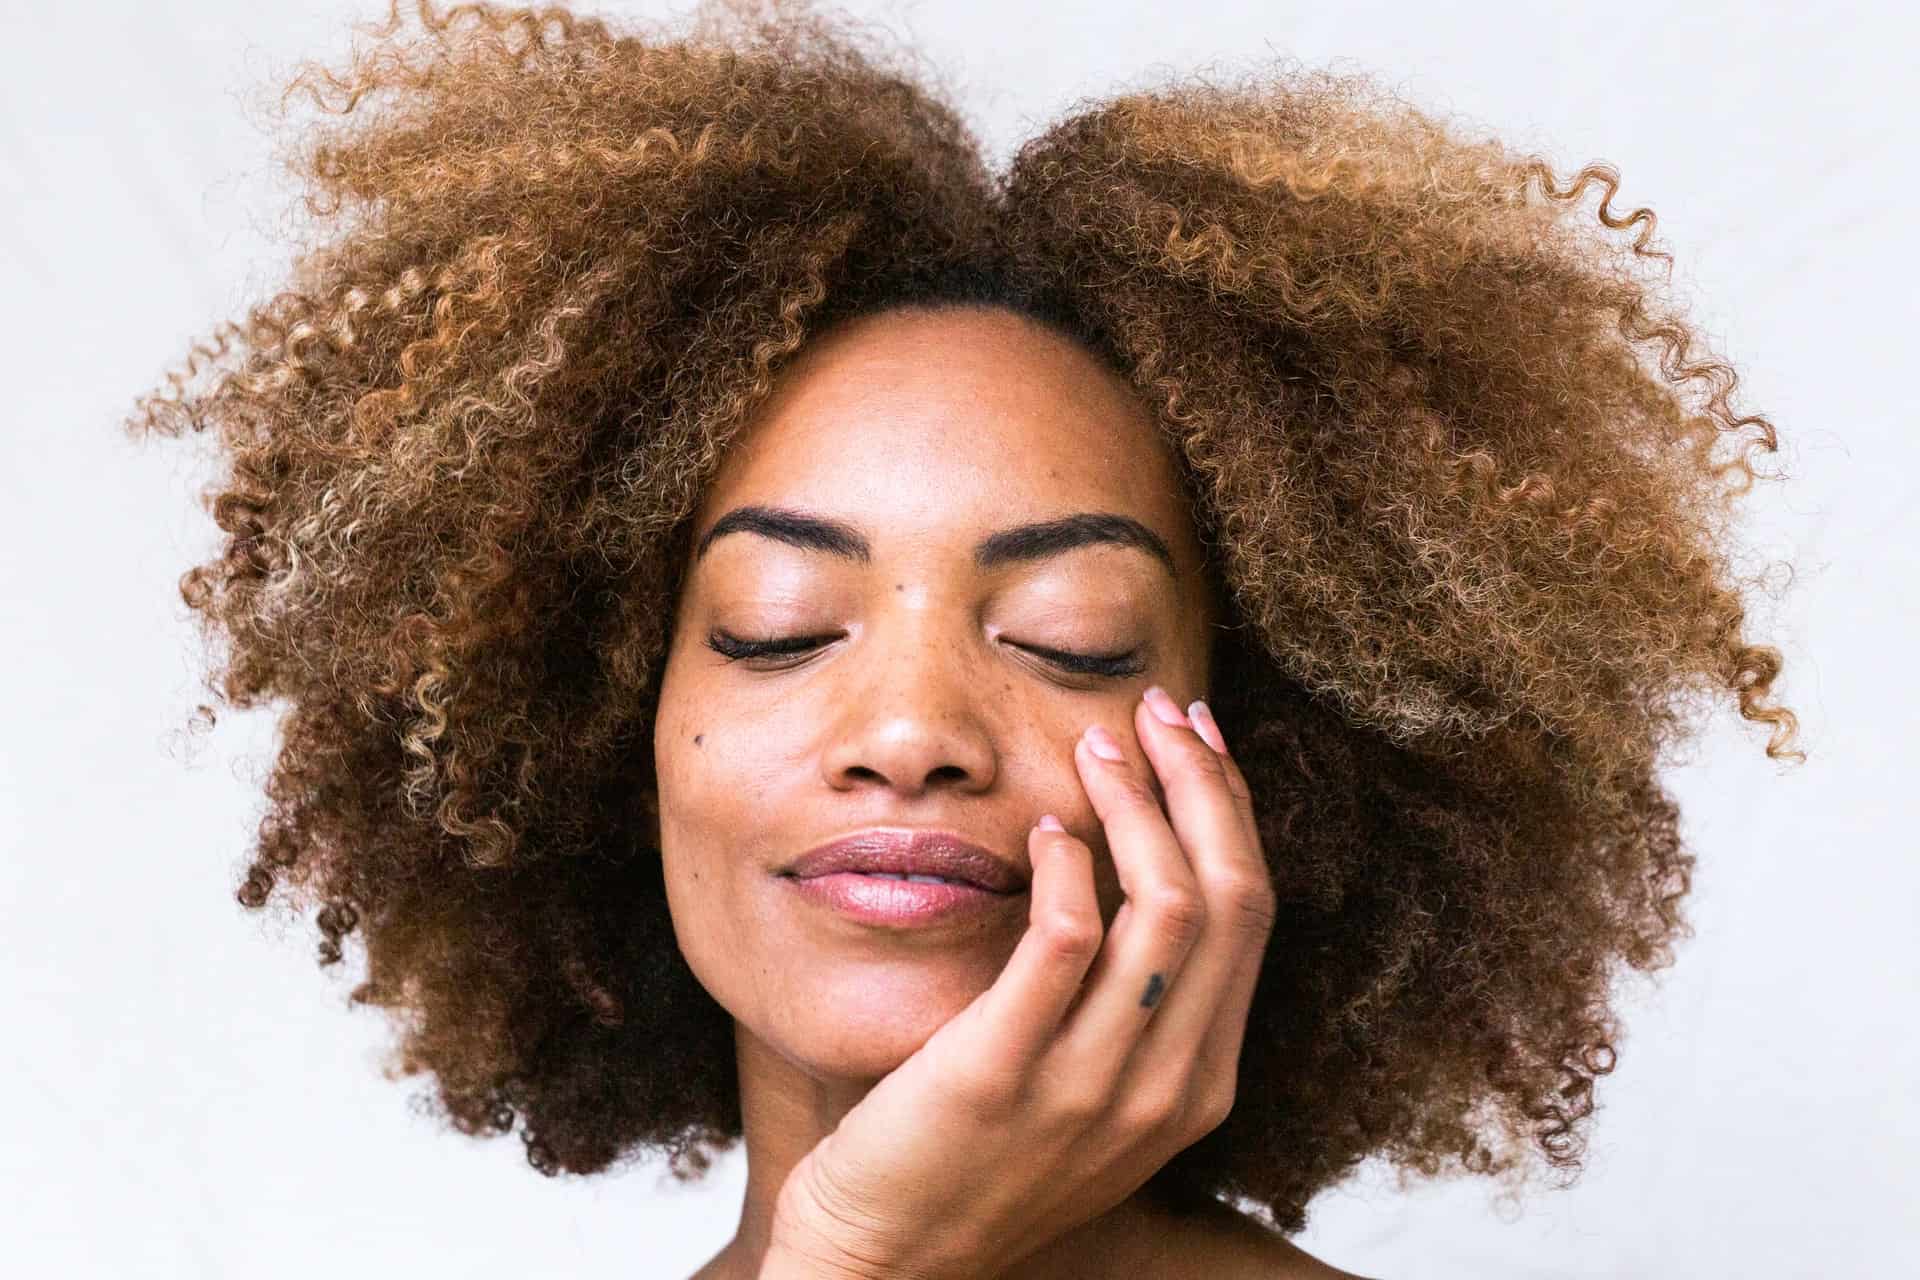 Beautiful complexion in a few days? Learn the 60 second rule!